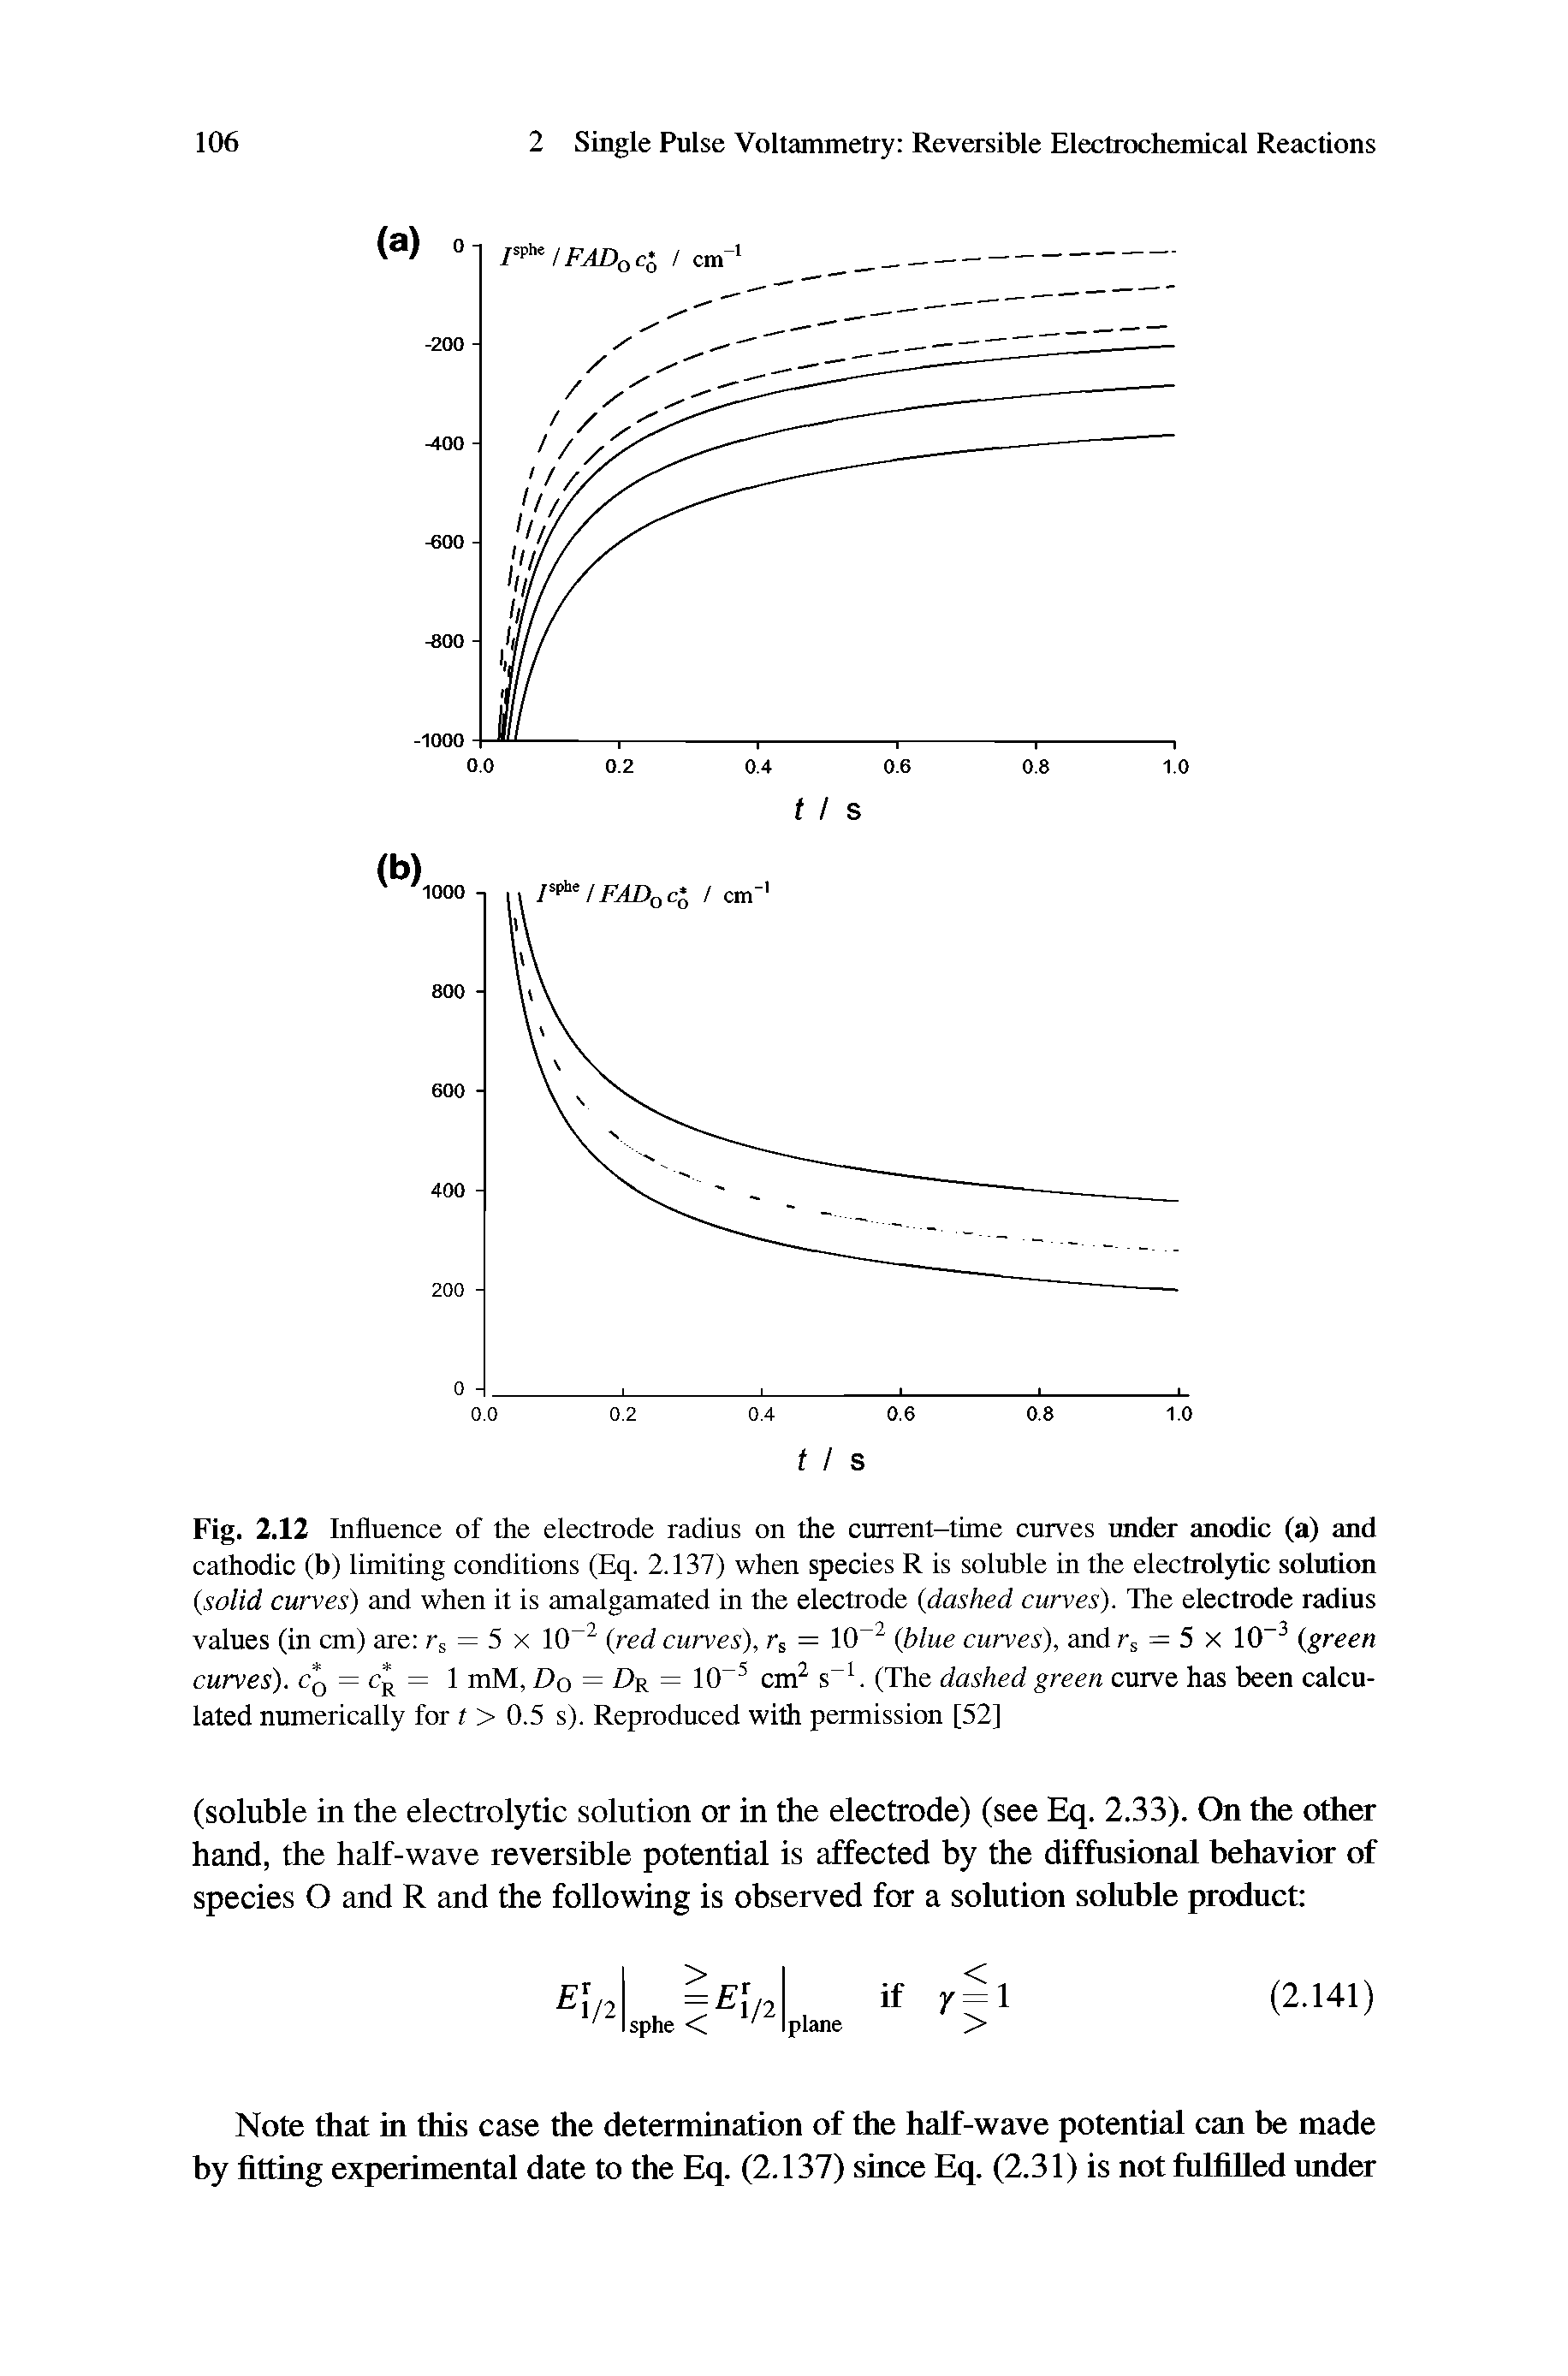 Fig. 2.12 Influence of the electrode radius on the current-time curves under anodic (a) and cathodic (b) limiting conditions (Eq. 2.137) when species R is soluble in the electrolytic solution (solid curves) and when it is amalgamated in the electrode (dashed curves). The electrode radius values (in cm) are rs = 5 x 1CT2 (red curves), rs = 1CT2 (blue curves), and rs = 5 x 10-3 (green curves). c 0 = c R= 1 mM, D0 = Dr = 1CT5 cm2 s-1. (The dashed green curve has been calculated numerically for t > 0.5 s). Reproduced with permission [52]...